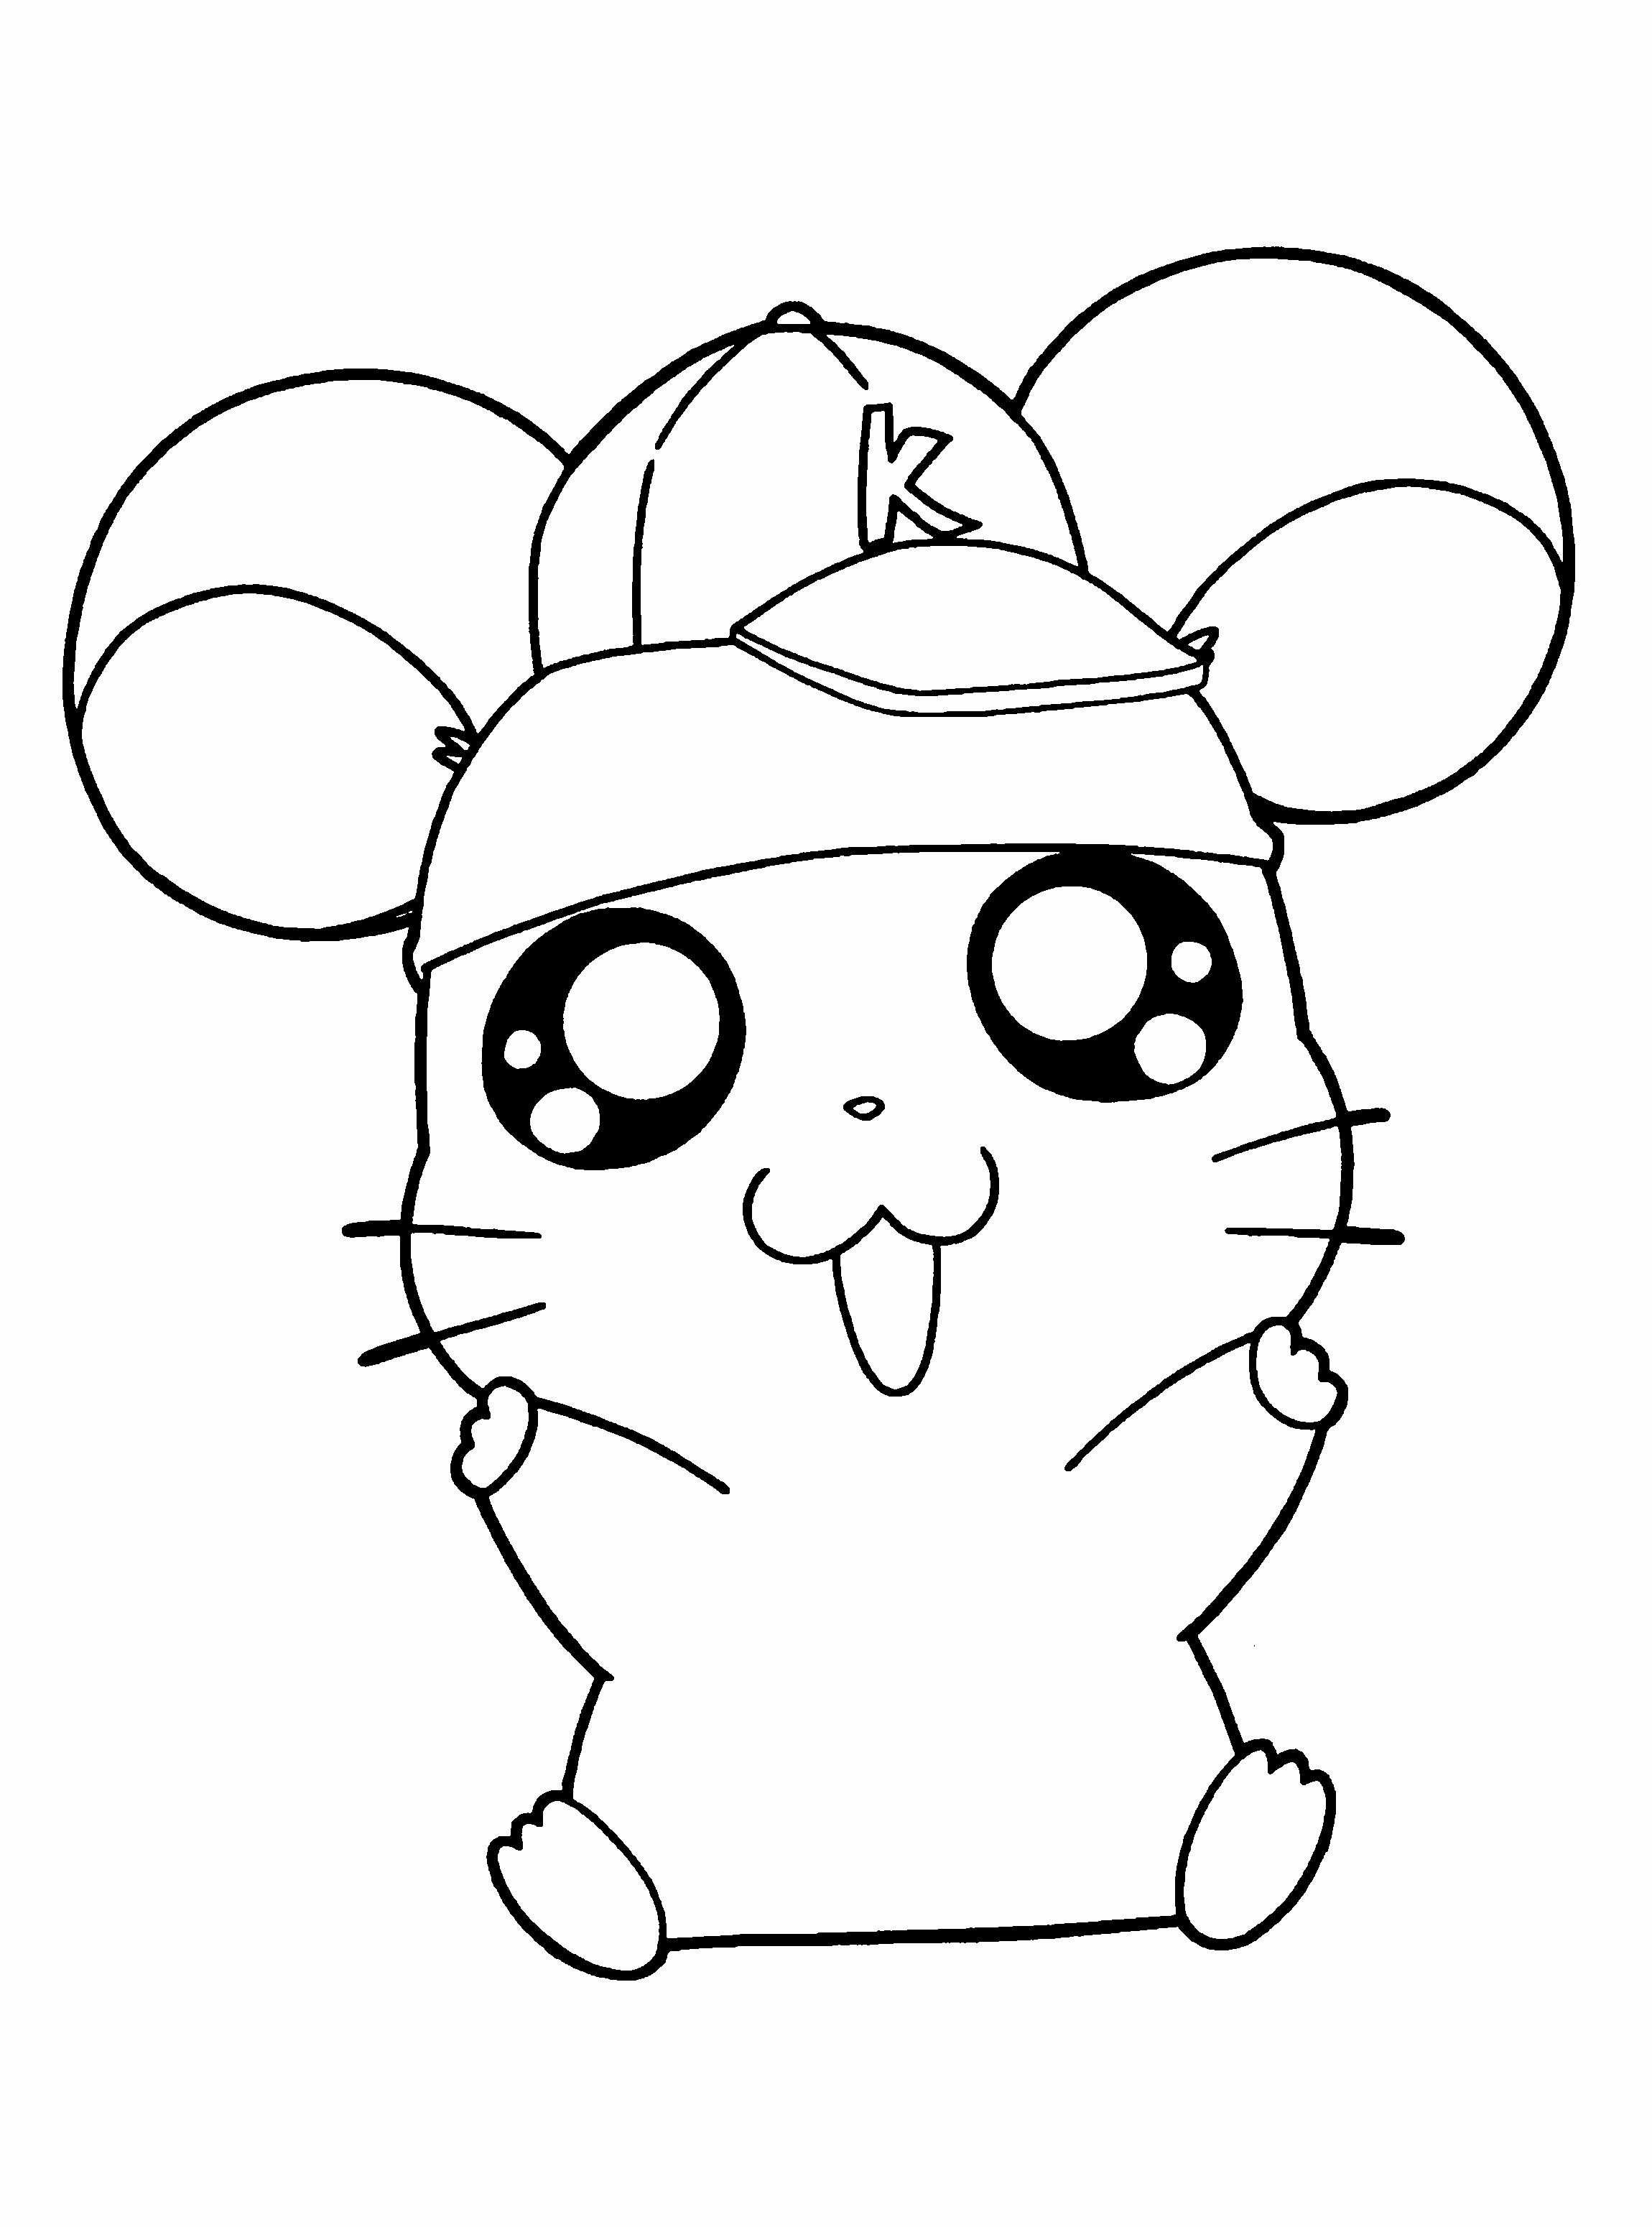 Free Hamster Coloring Pages at GetColorings.com | Free ...